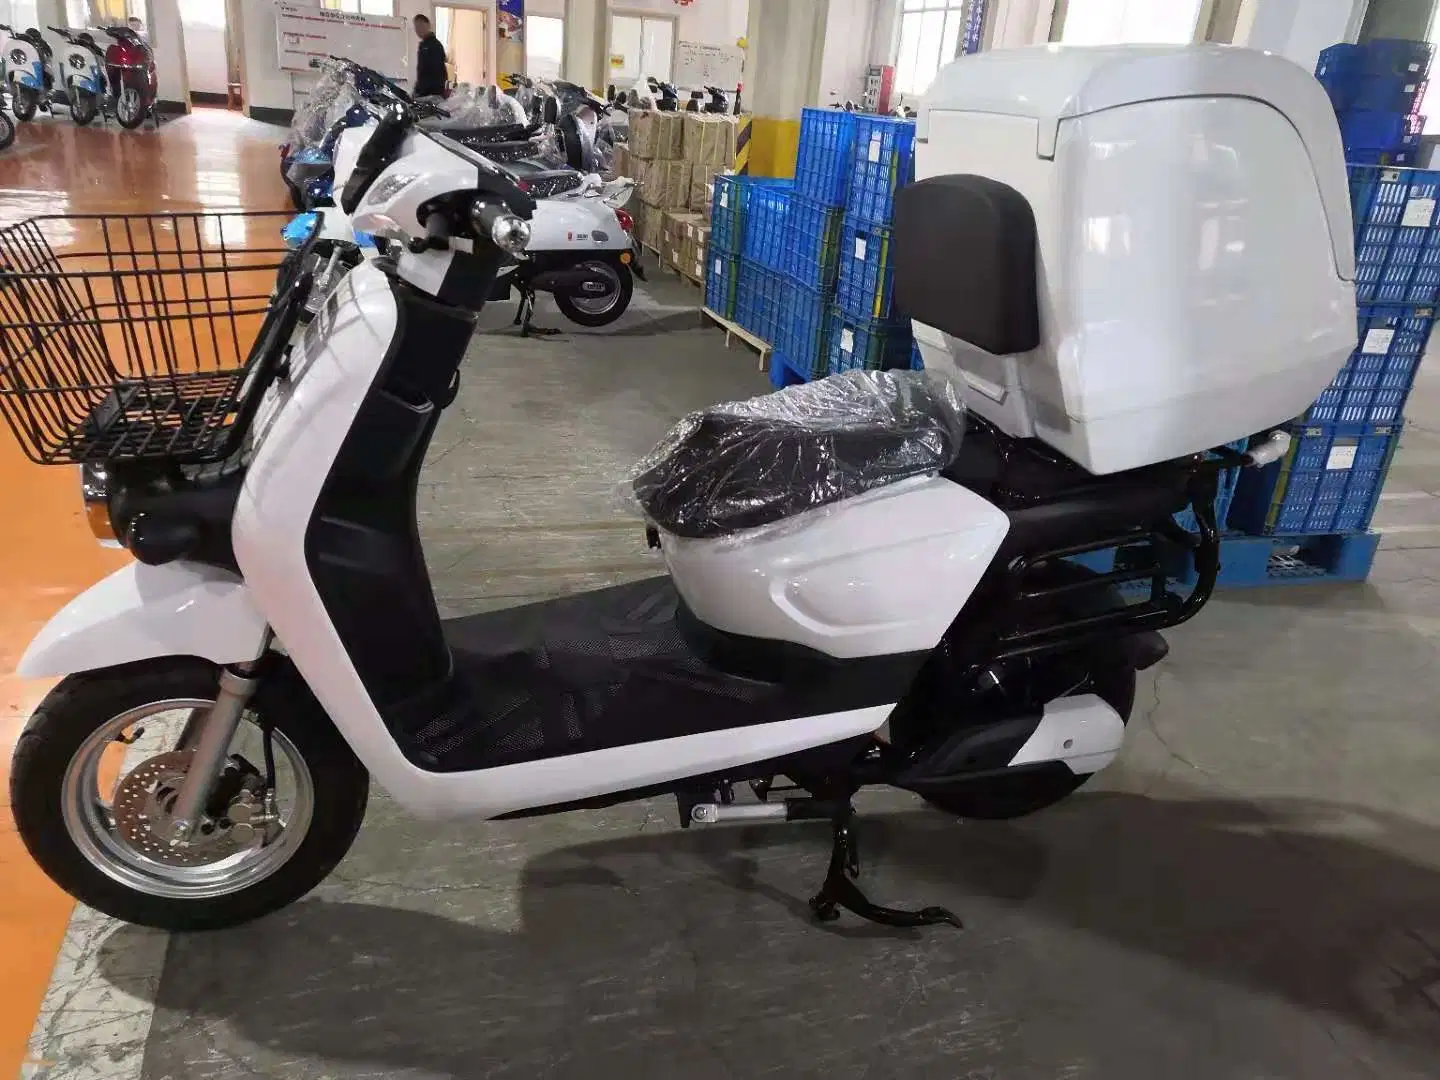 Big Rear Box Electric Motorcycle/Scooter for Fast Food Delivery